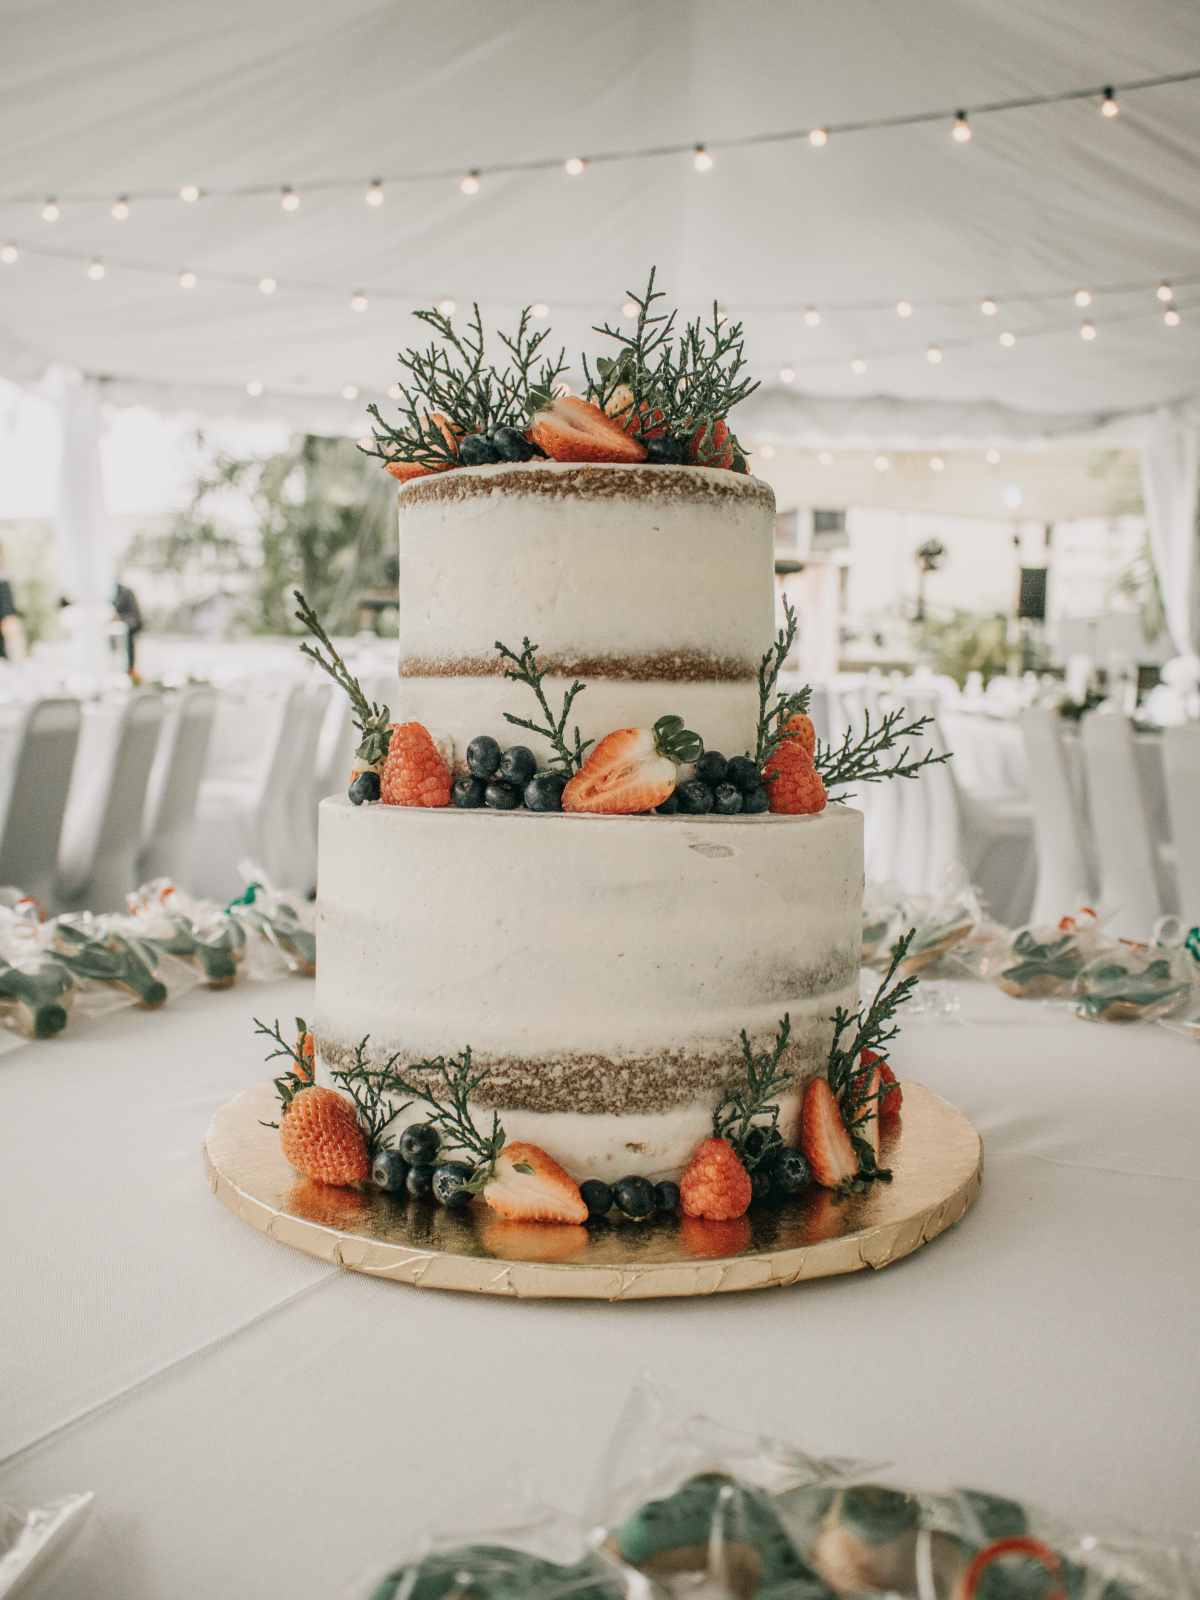 naked cake on table | One-Stop Fall Wedding Planning Guide | fall wedding | fall wedding ideas on a budget